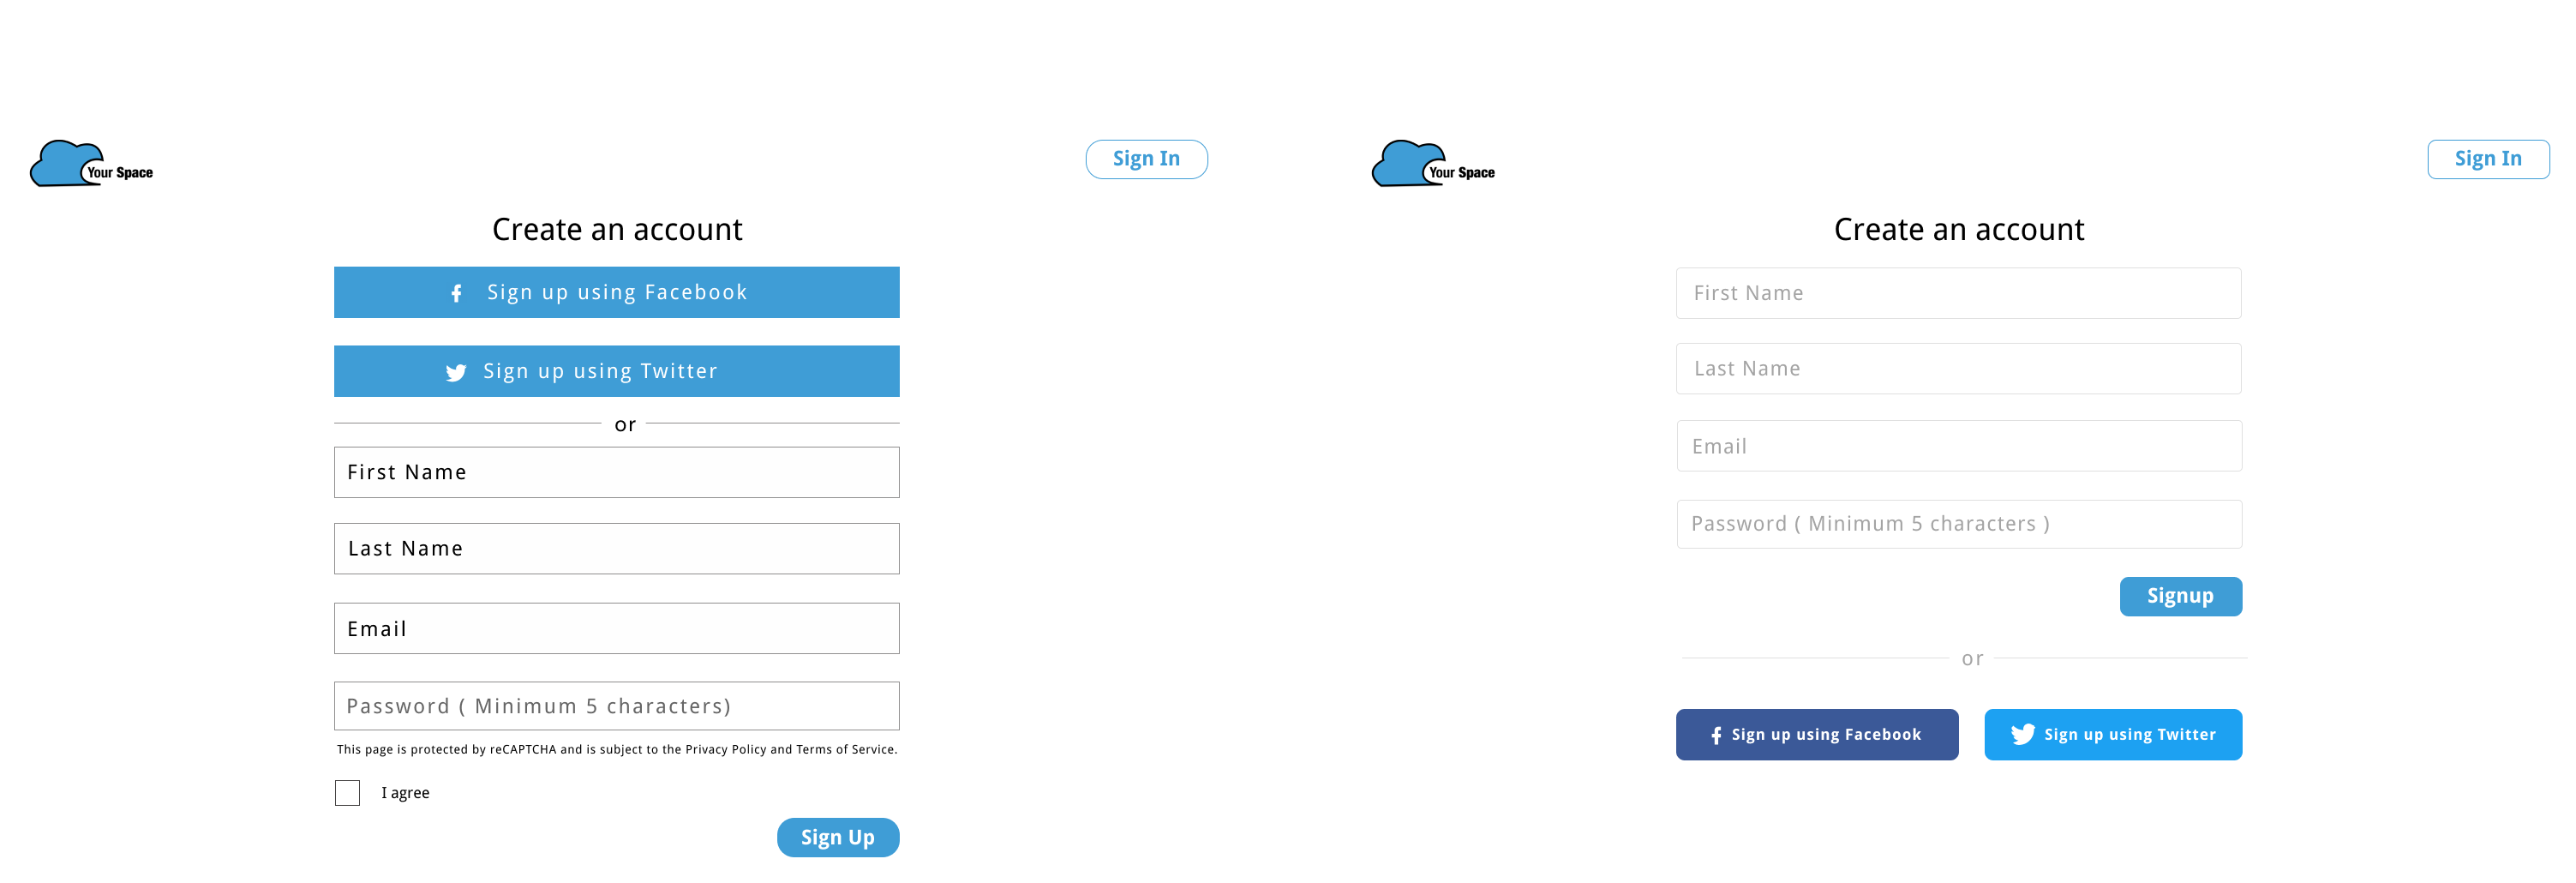 Image showing Option A and Option B for how the Signup page could be displayed